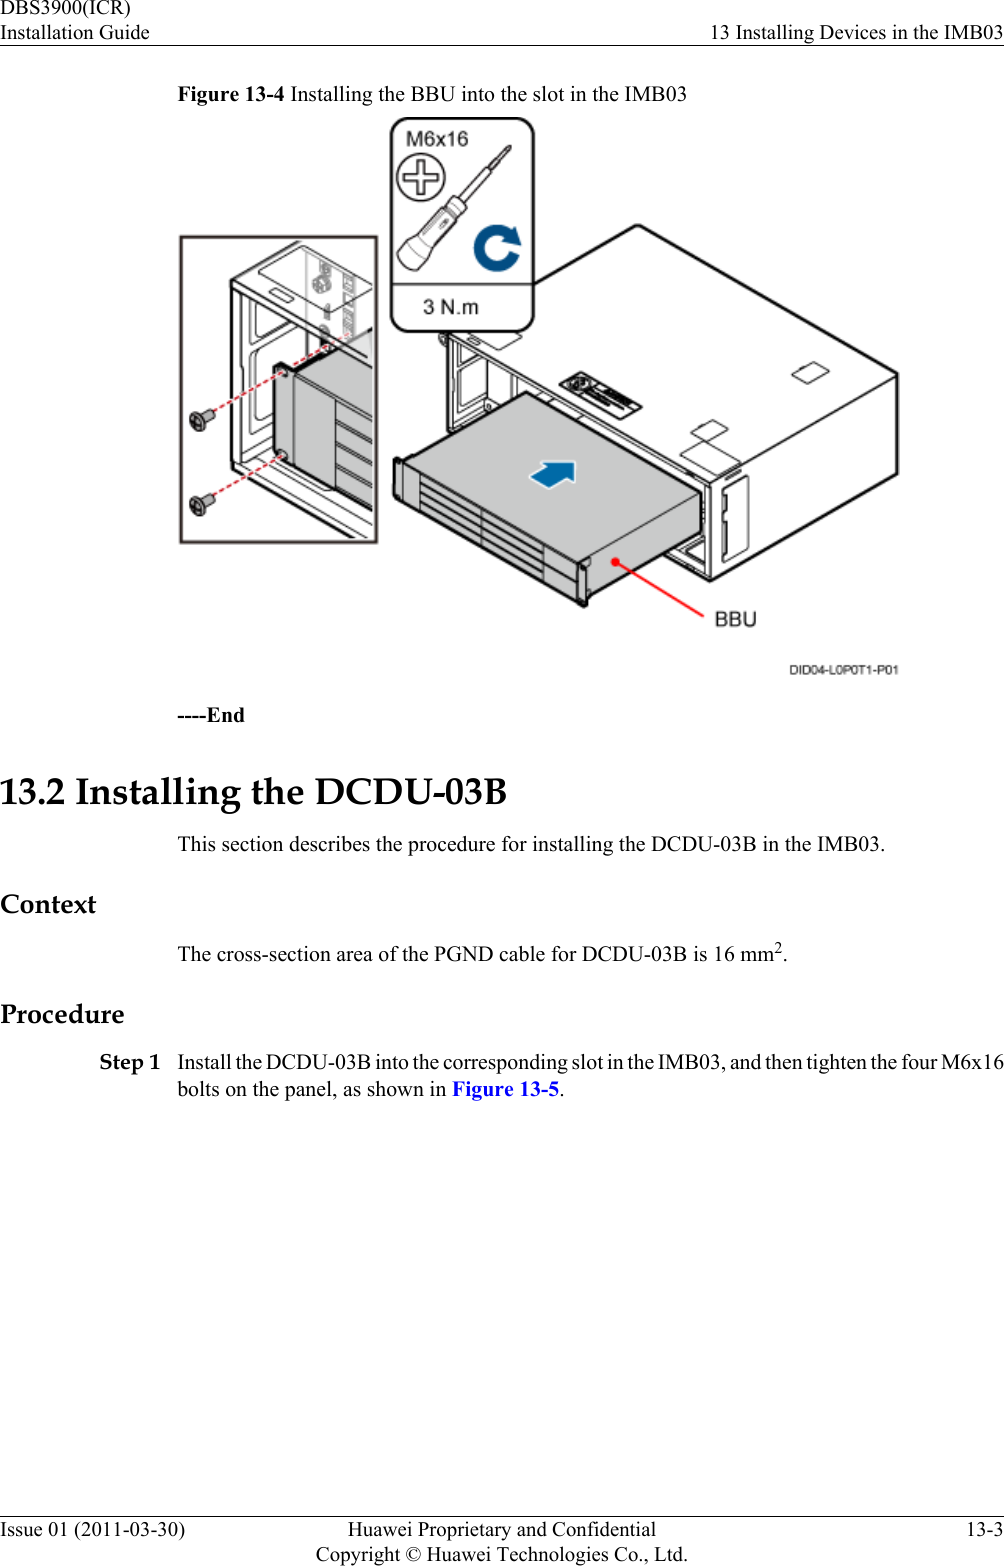 Figure 13-4 Installing the BBU into the slot in the IMB03----End13.2 Installing the DCDU-03BThis section describes the procedure for installing the DCDU-03B in the IMB03.ContextThe cross-section area of the PGND cable for DCDU-03B is 16 mm2.ProcedureStep 1 Install the DCDU-03B into the corresponding slot in the IMB03, and then tighten the four M6x16bolts on the panel, as shown in Figure 13-5.DBS3900(ICR)Installation Guide 13 Installing Devices in the IMB03Issue 01 (2011-03-30) Huawei Proprietary and ConfidentialCopyright © Huawei Technologies Co., Ltd.13-3